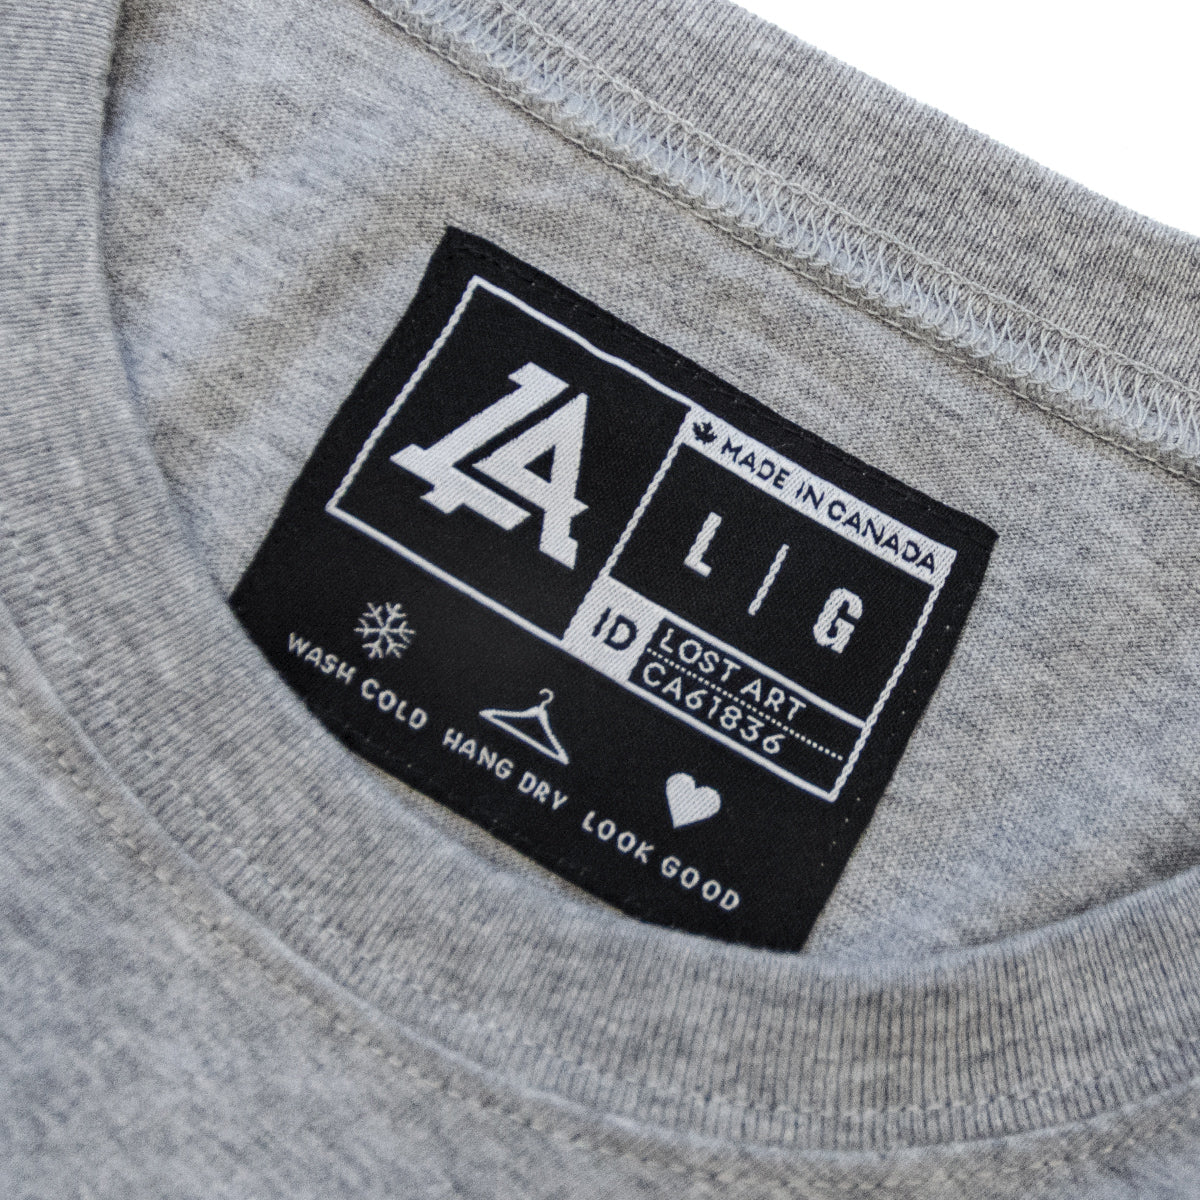 Lost Art Canada - white on grey basic women logo tee inside tag view